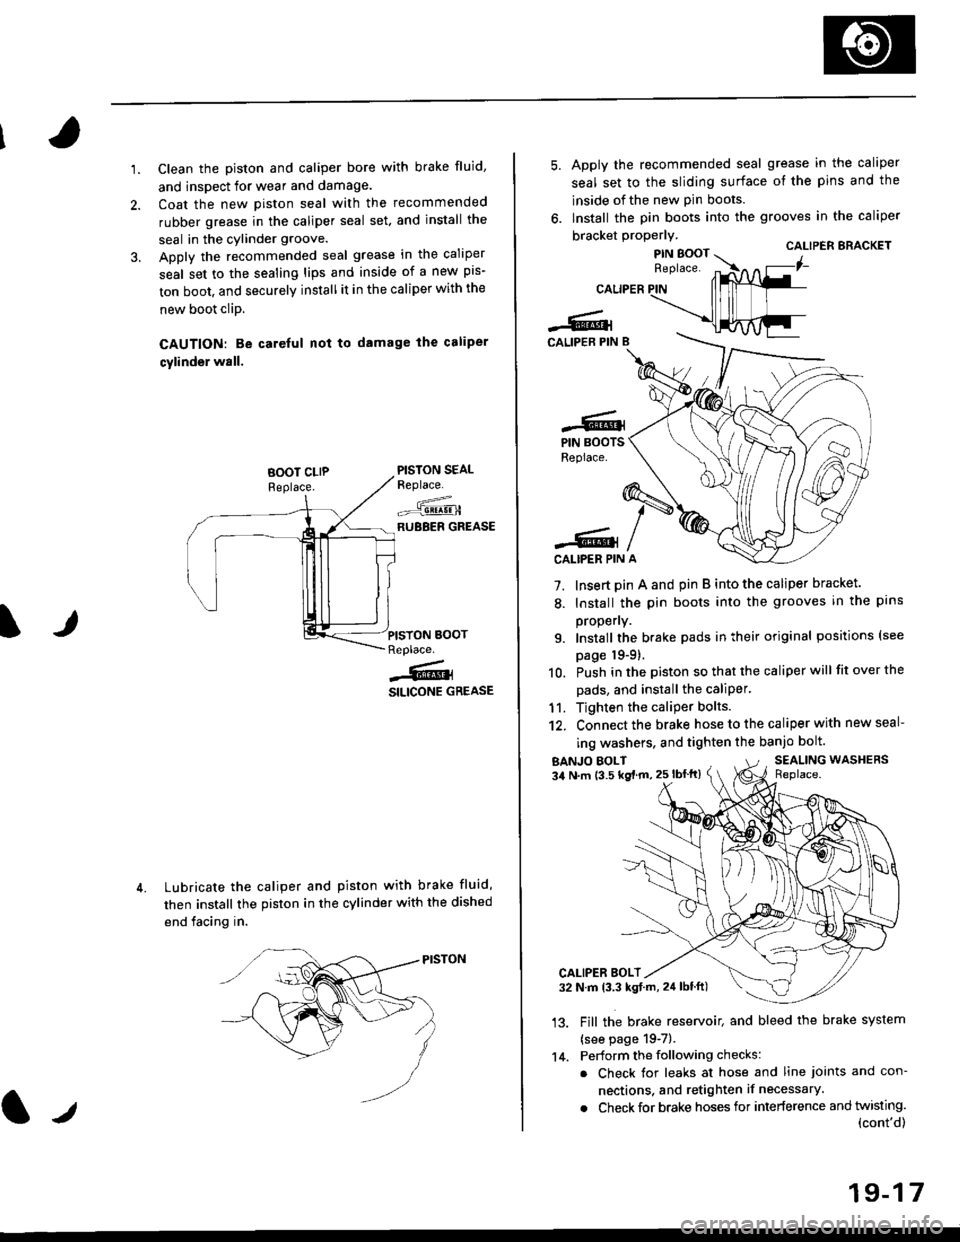 HONDA CIVIC 2000 6.G User Guide 1.Clean the piston and caliper bore with brake fluid,
and inspect for wear and damage.
Coat the new piston seal with the recommended
rubber grease in the caliper seal set. and install the
seal in the